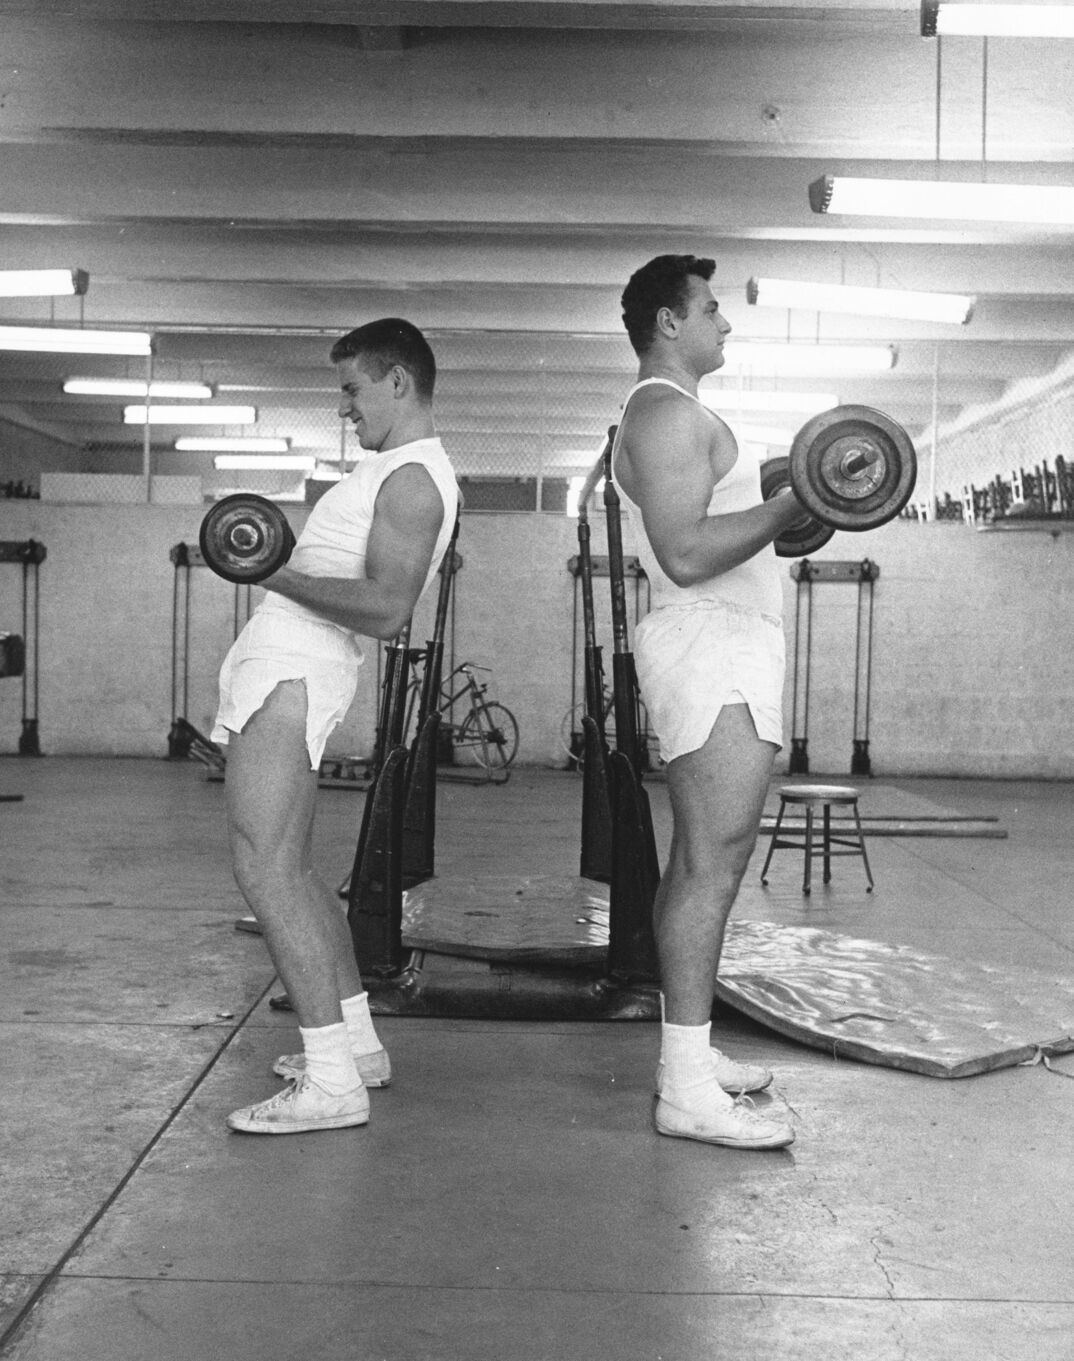 Black-and-white image. In a gym with brick walls and overhead lighting, two men in white tank tops and shorts stand back to back holding barbells in their hands to bicep curl. The taller man on the right stands straight while the shorter man on the left hunches his back. Behind them are mats, weight racks, and a bicycle.